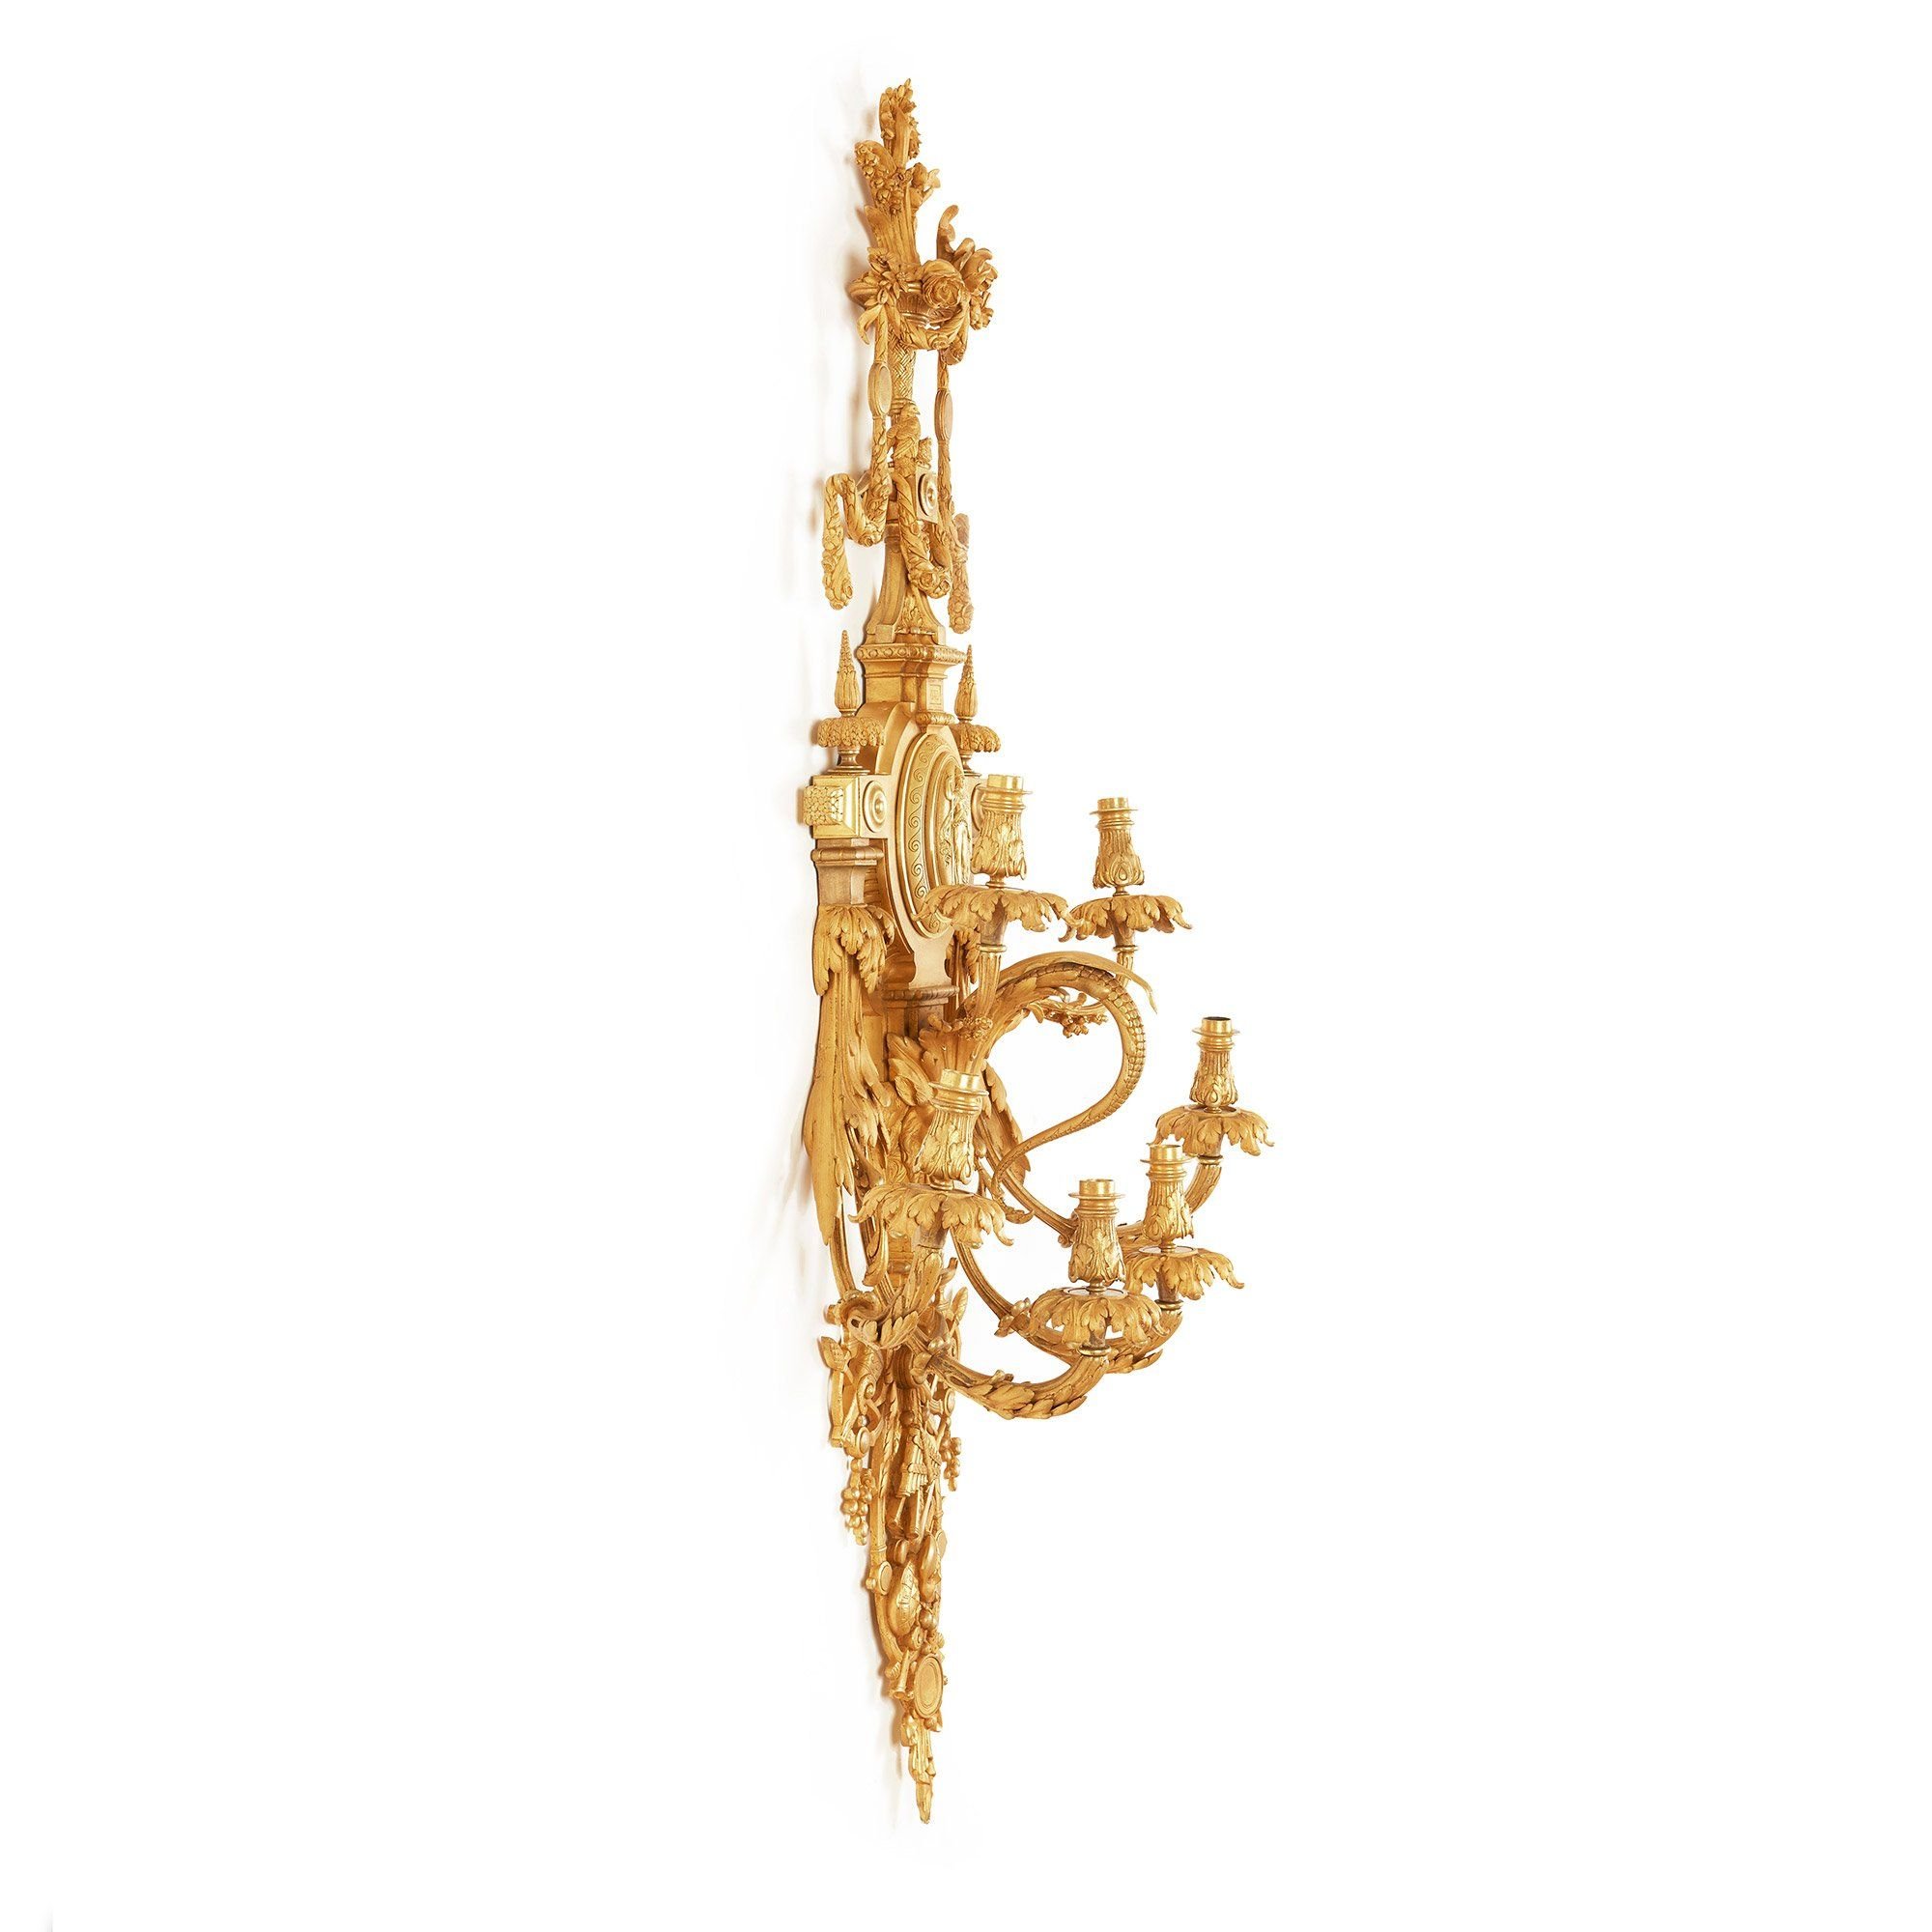 Very large pair of ormolu French antique wall lights | Mayfair Gallery